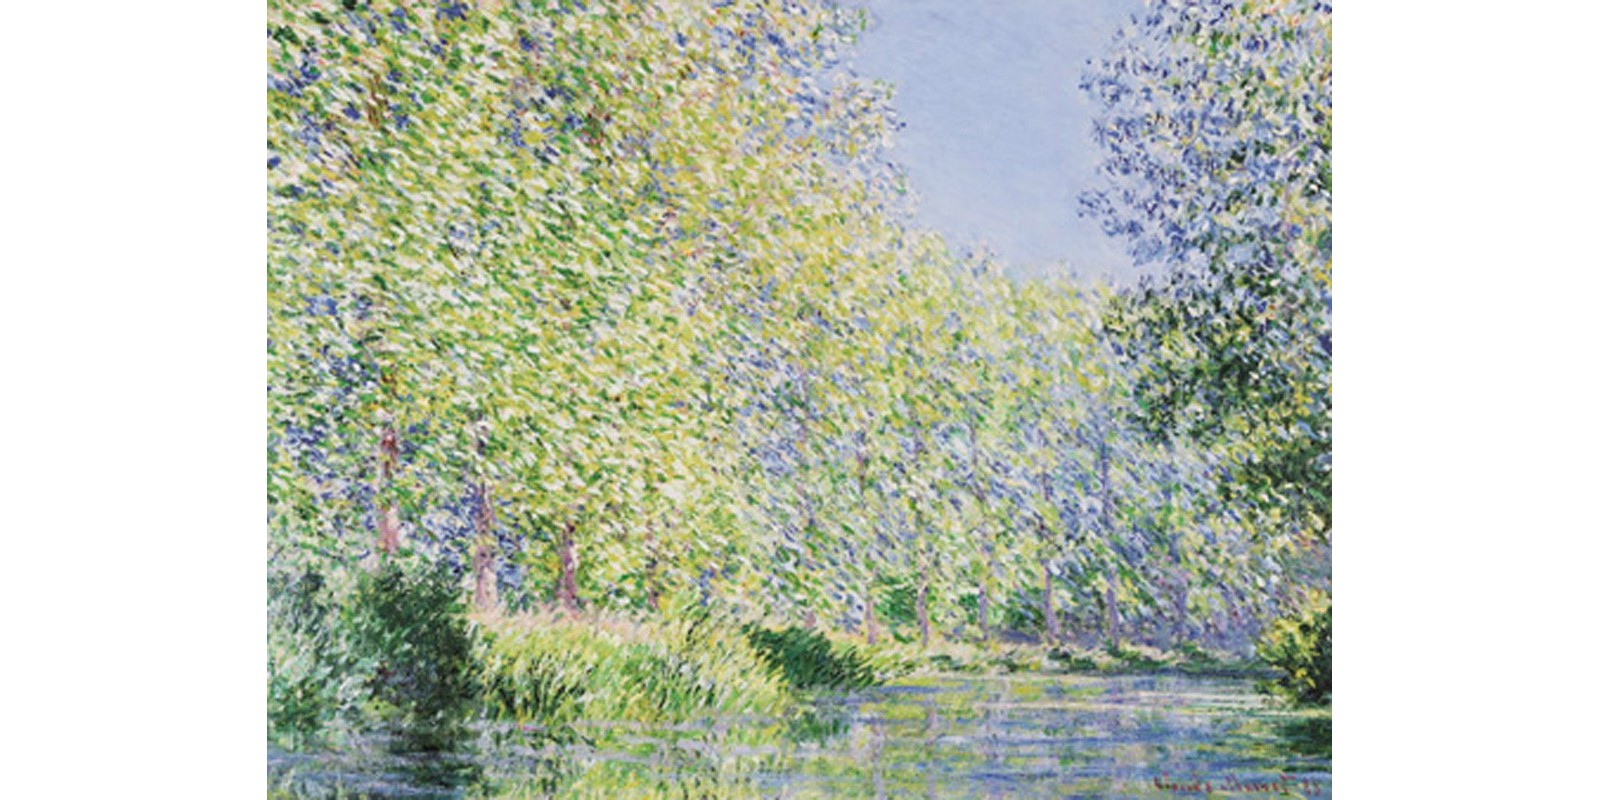 Claude Monet - Bend in the Epte River near Giverny